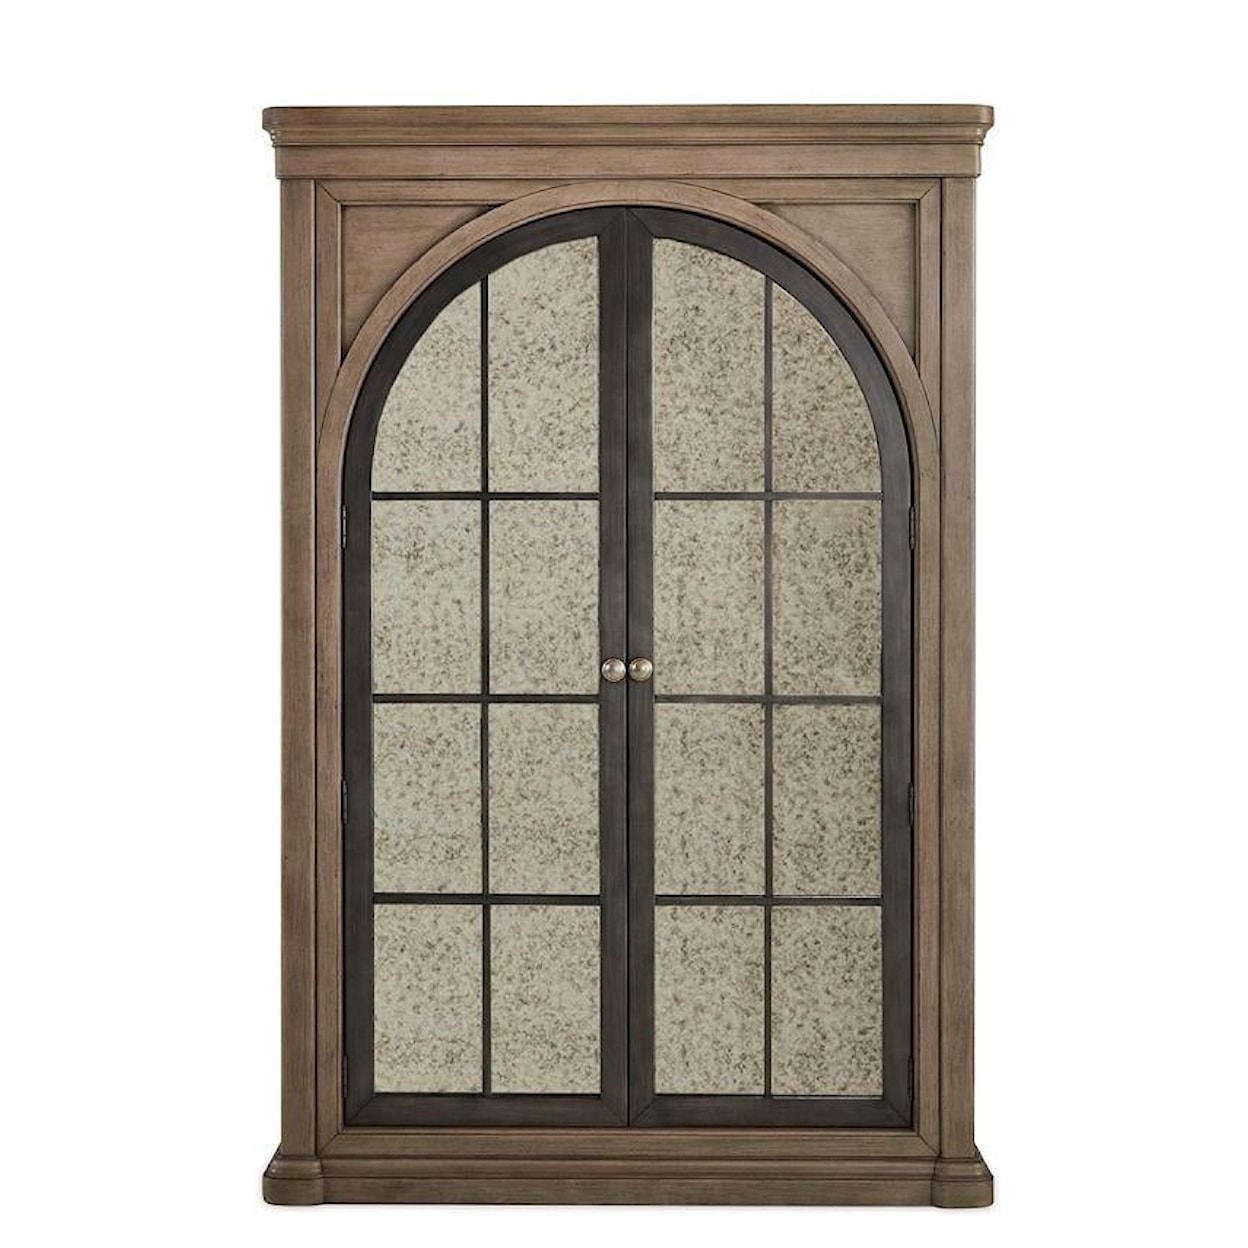 Trisha Yearwood Home Collection by Legacy Classic Nashville Armoire